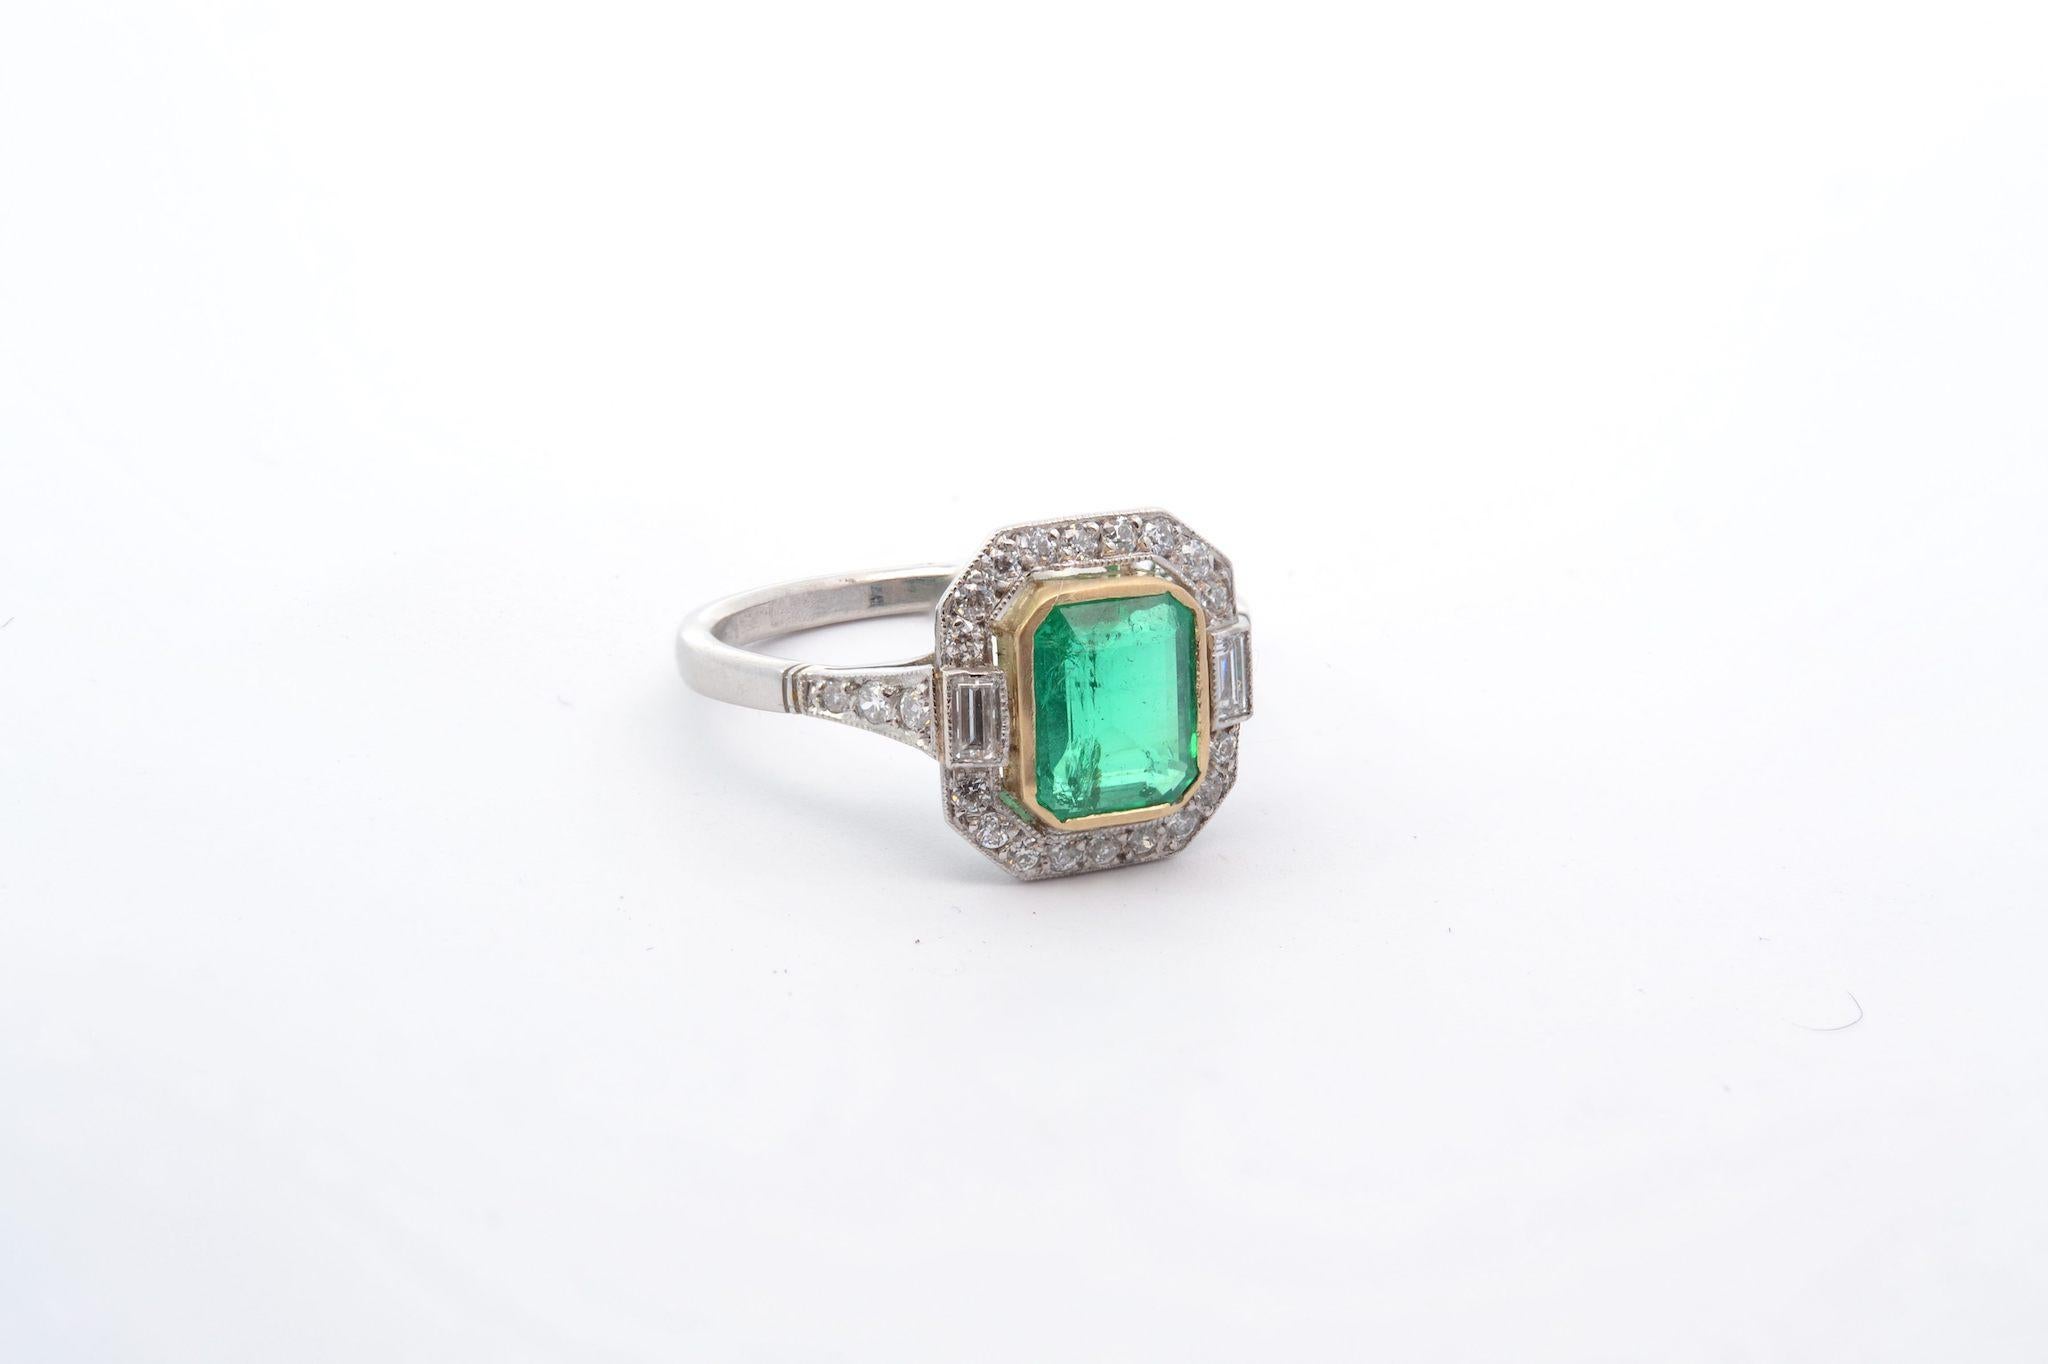 Art Deco 1.11 carats colombian emerald ring with diamonds For Sale